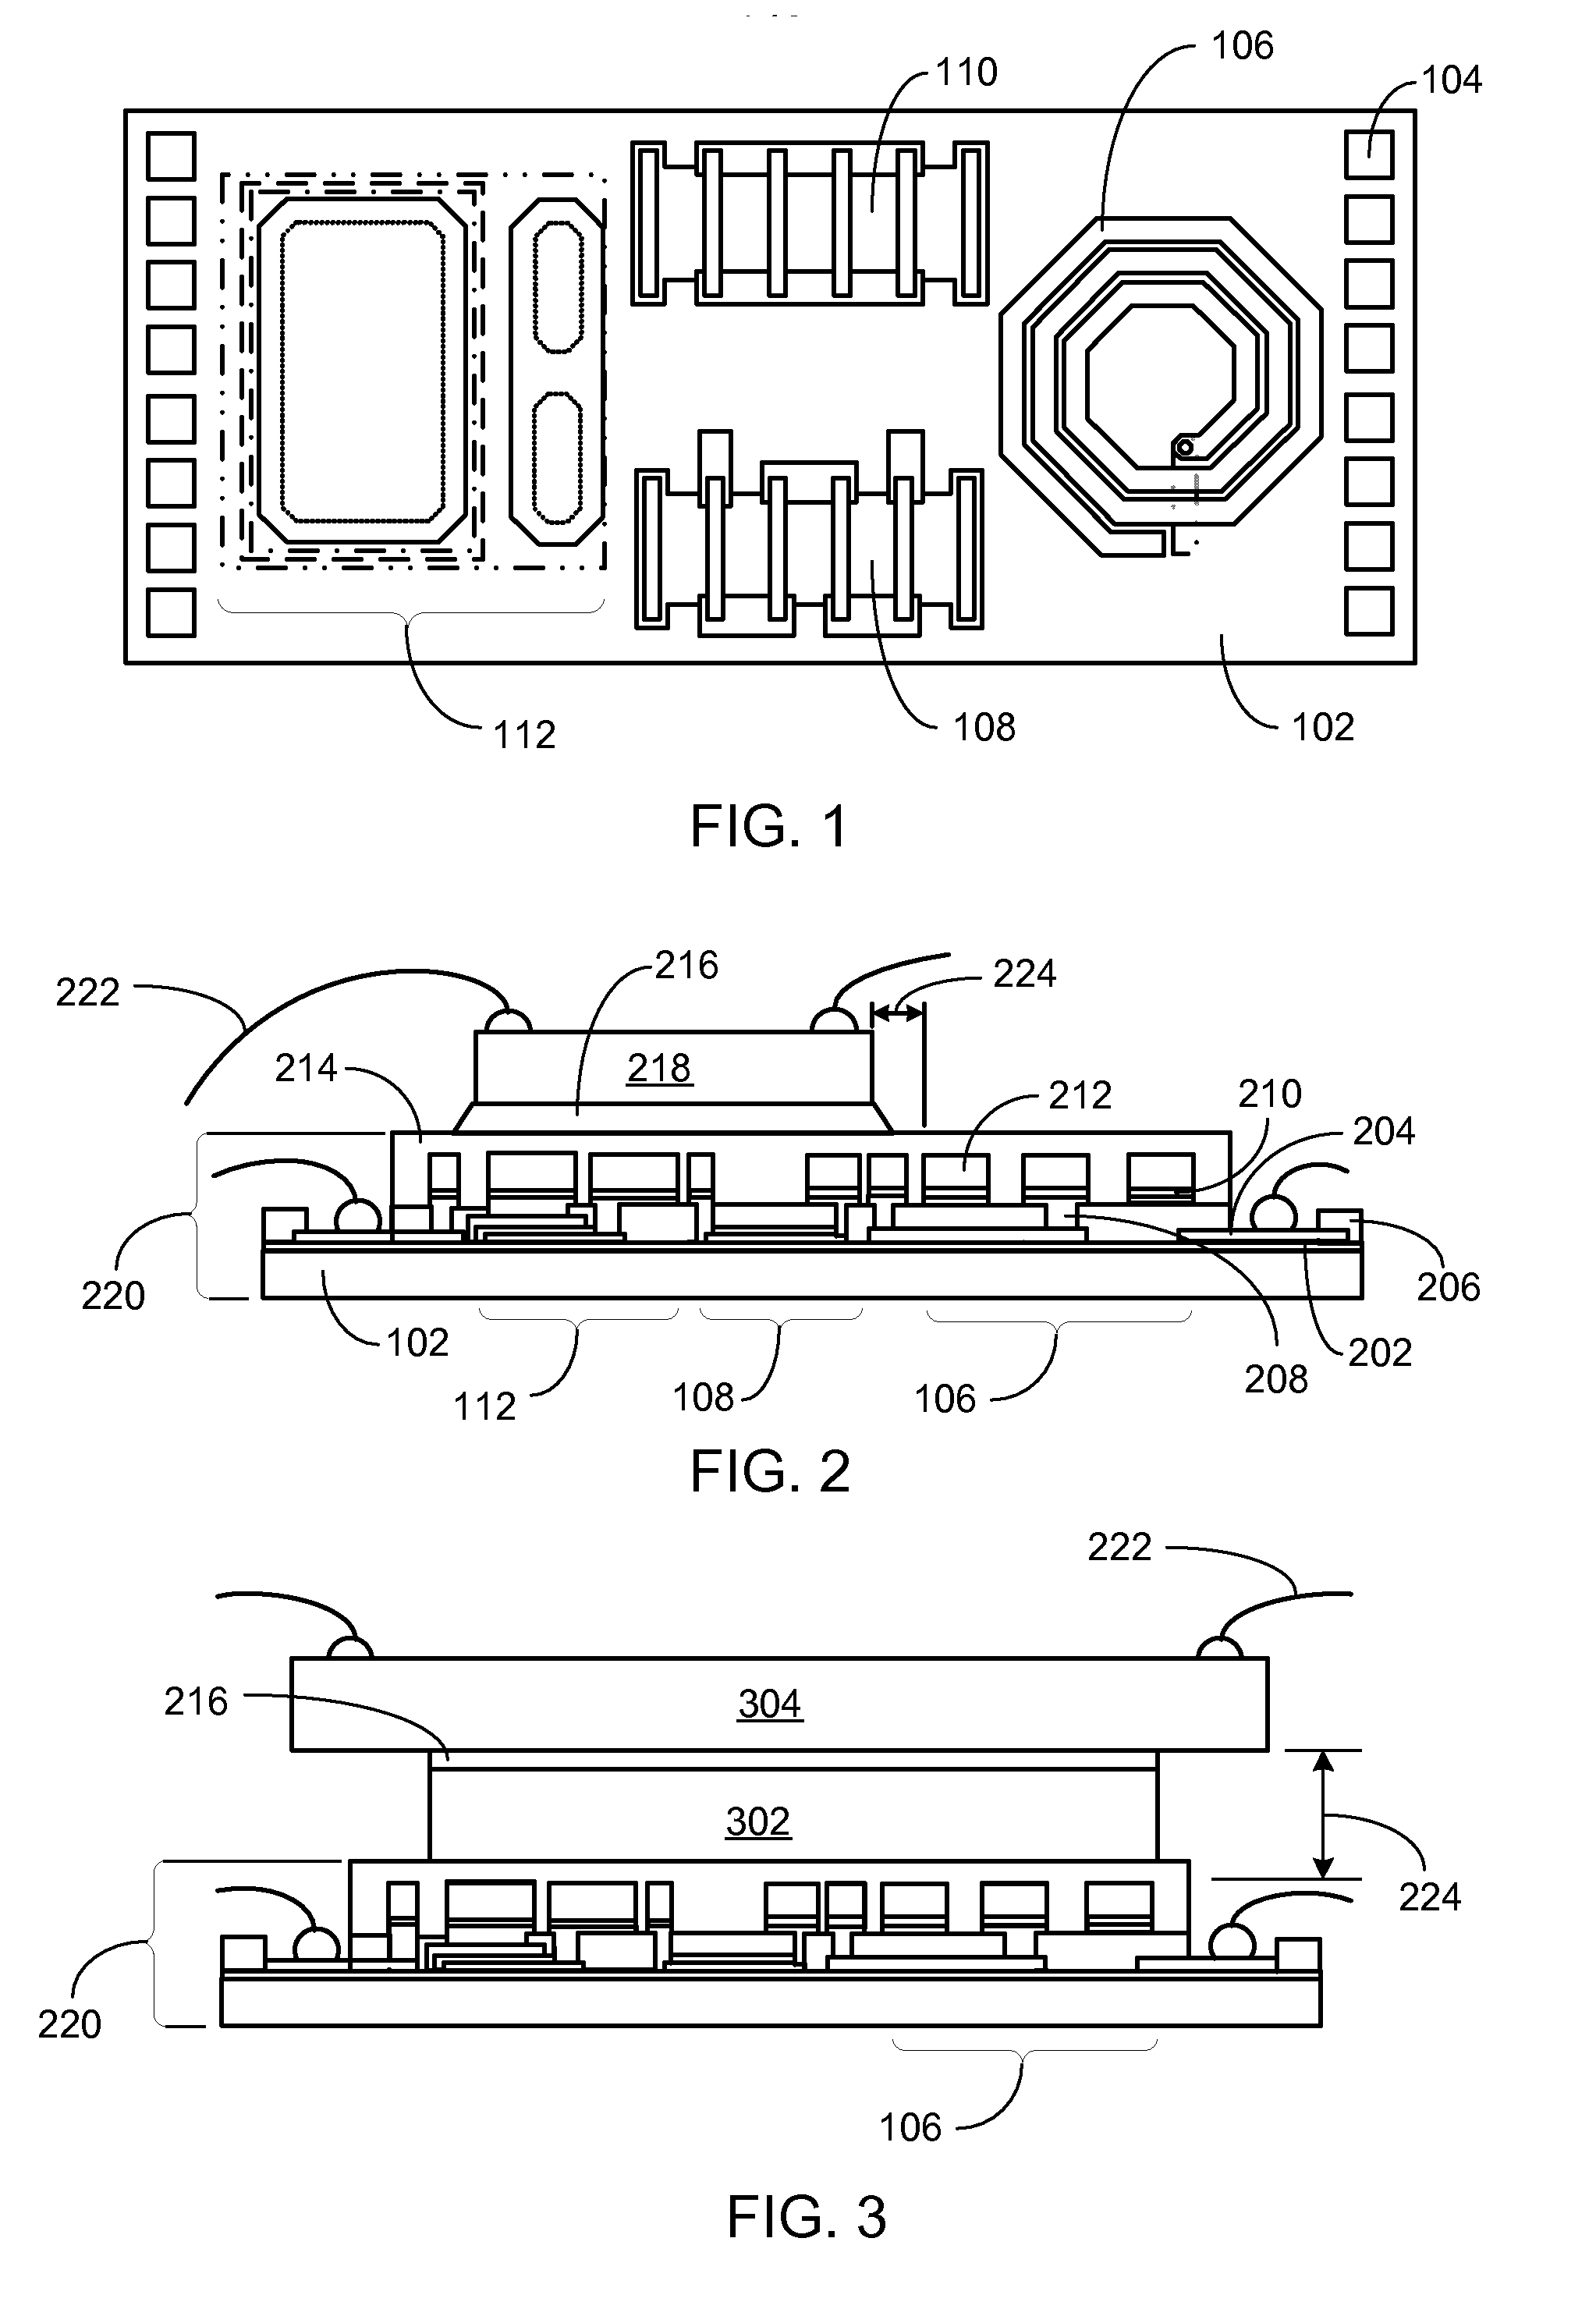 Integrated circuit stacking system with integrated passive components